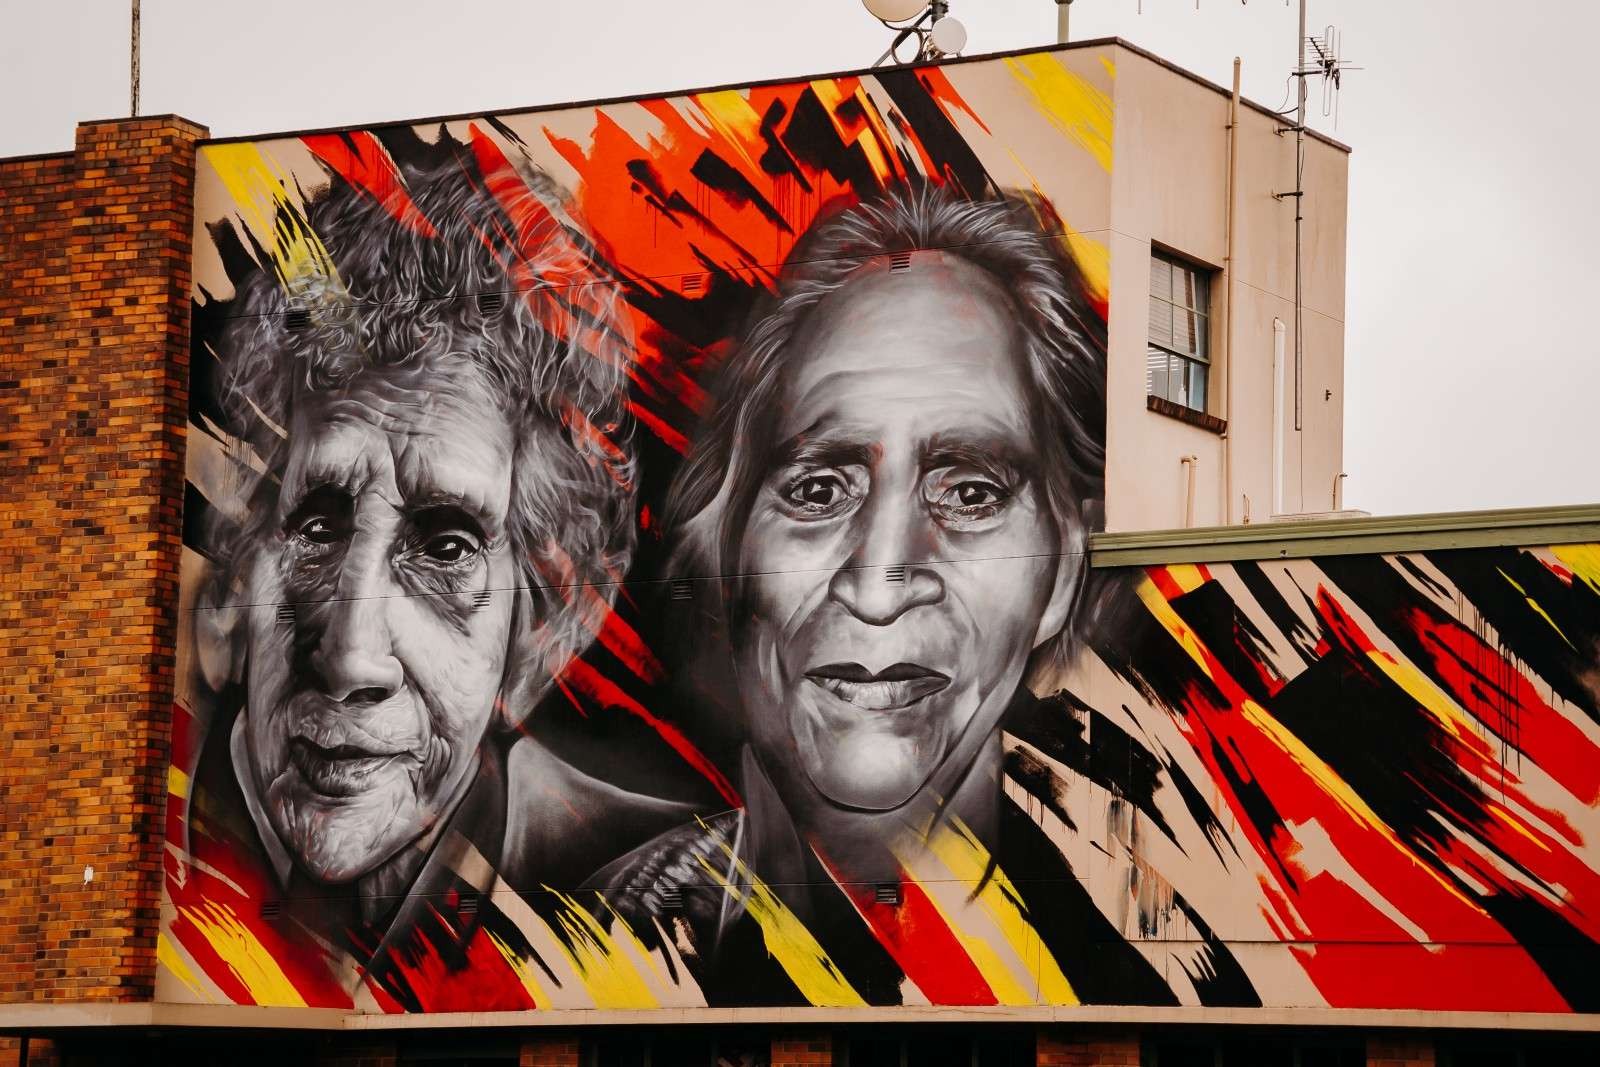 The latest works as part of the Aboriginal Street Art Project, Welsford Street, Shepparton.